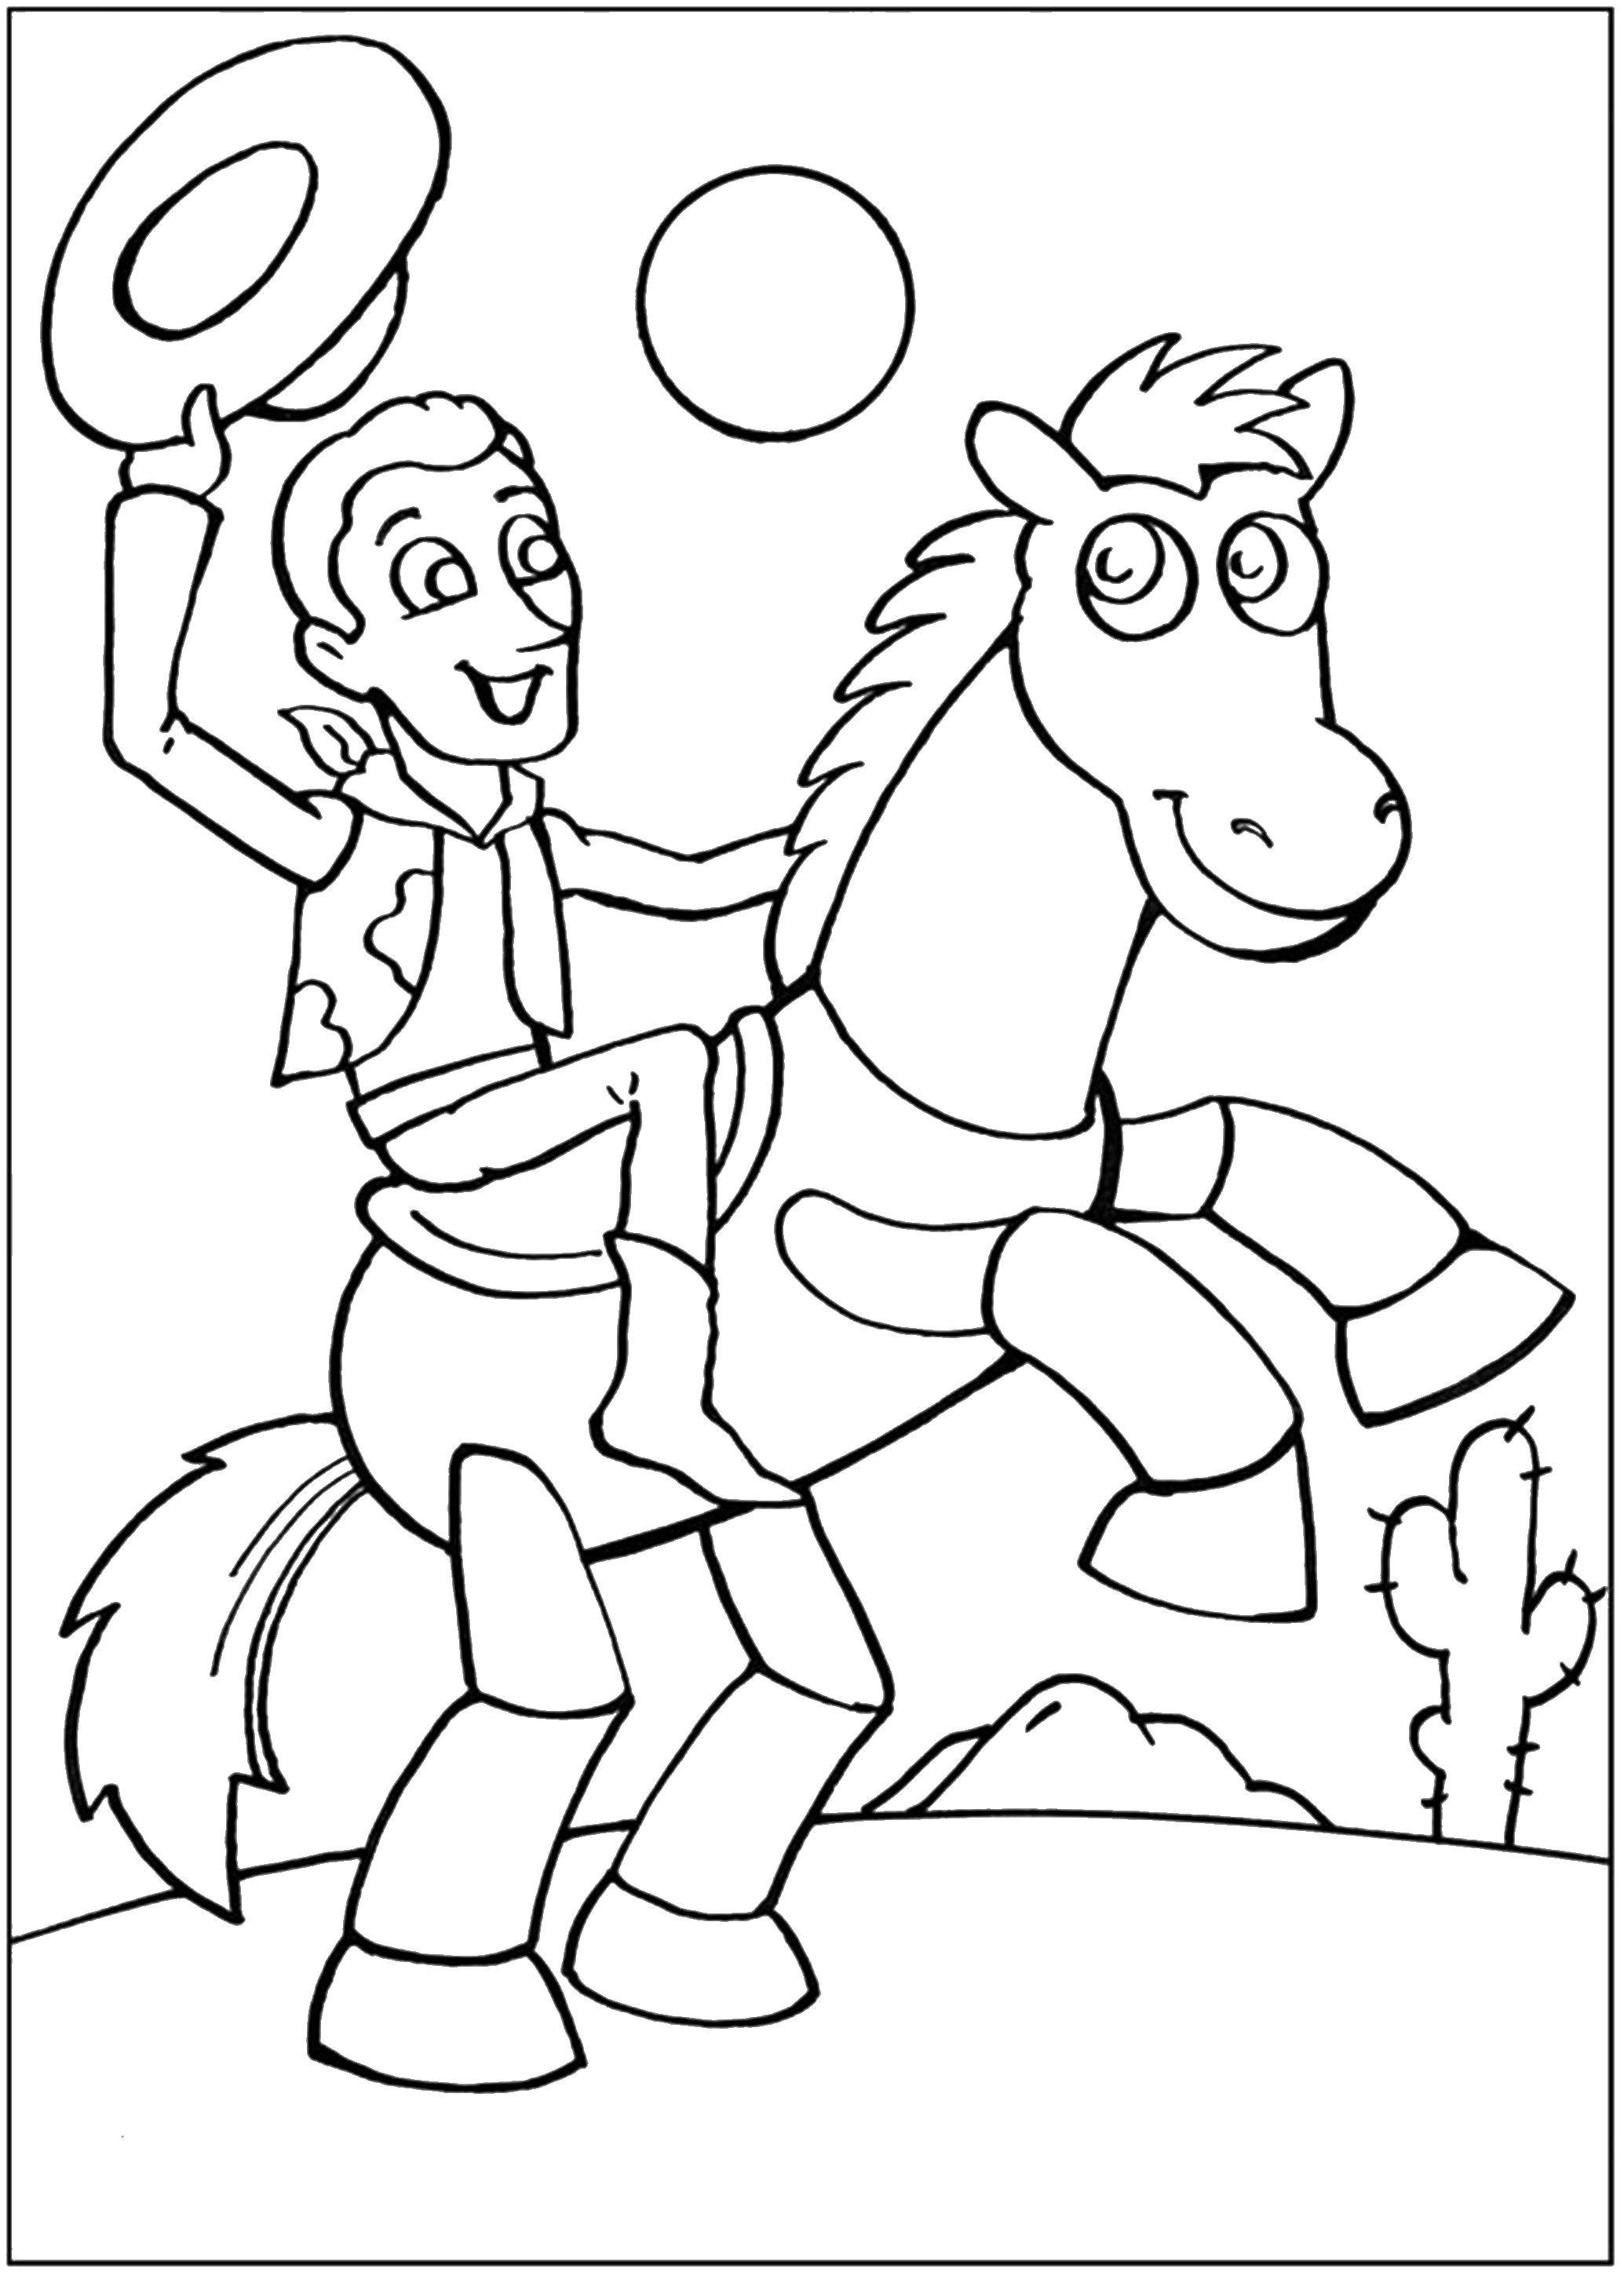 Coloring Cowboy from toy story. Category Disney coloring pages. Tags:  Disney, "toy Story" cowboy.